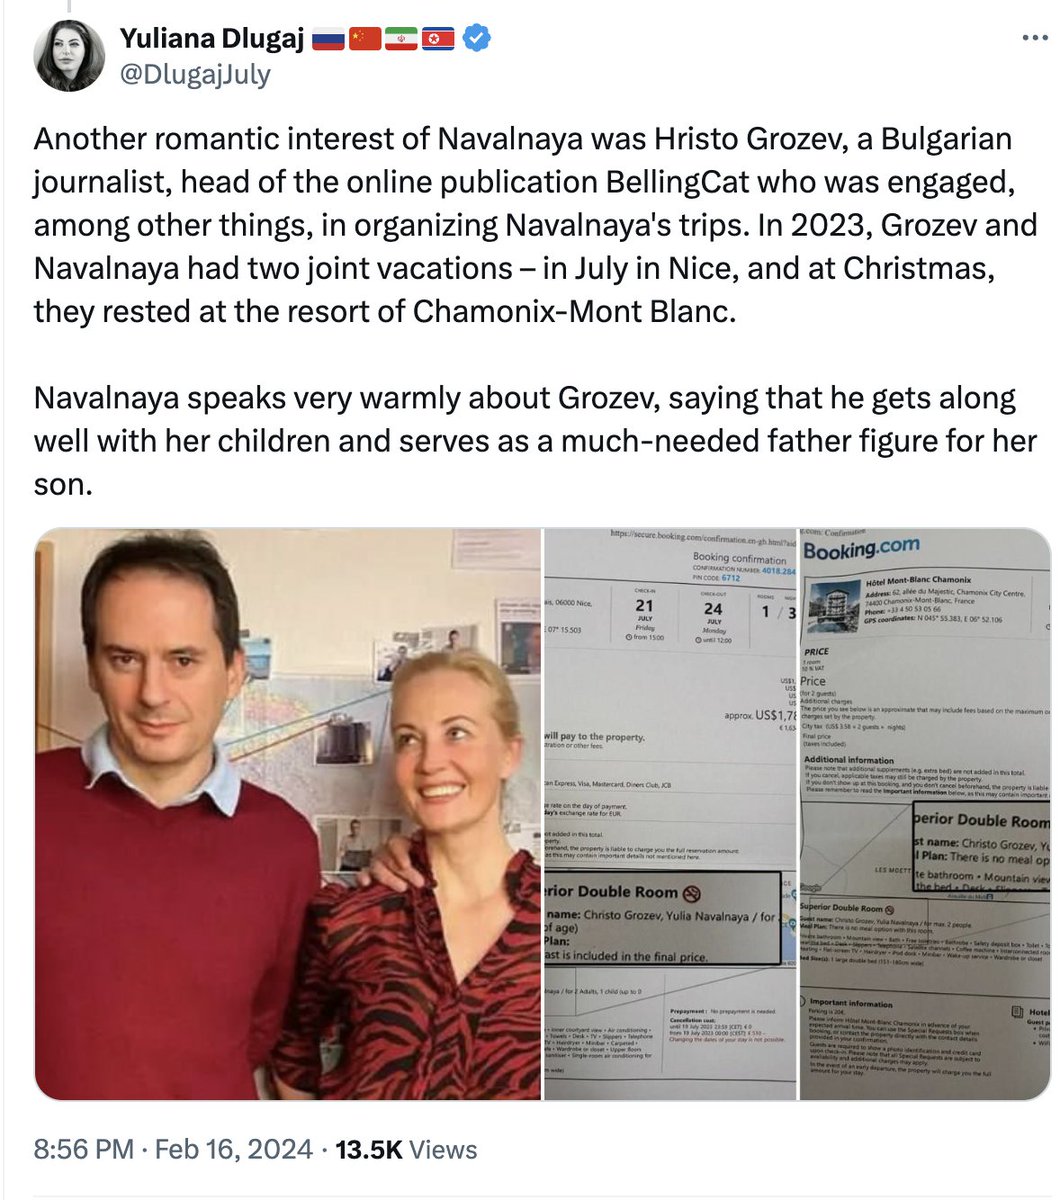 I've seen two major disinformation themes around Navalny's death, one is misrepresenting already false claims, shown left, the other is repeating a story based on fabricated videos and documents alleging an affair. The second one we recently unpicked in the Bellingcat Discord.